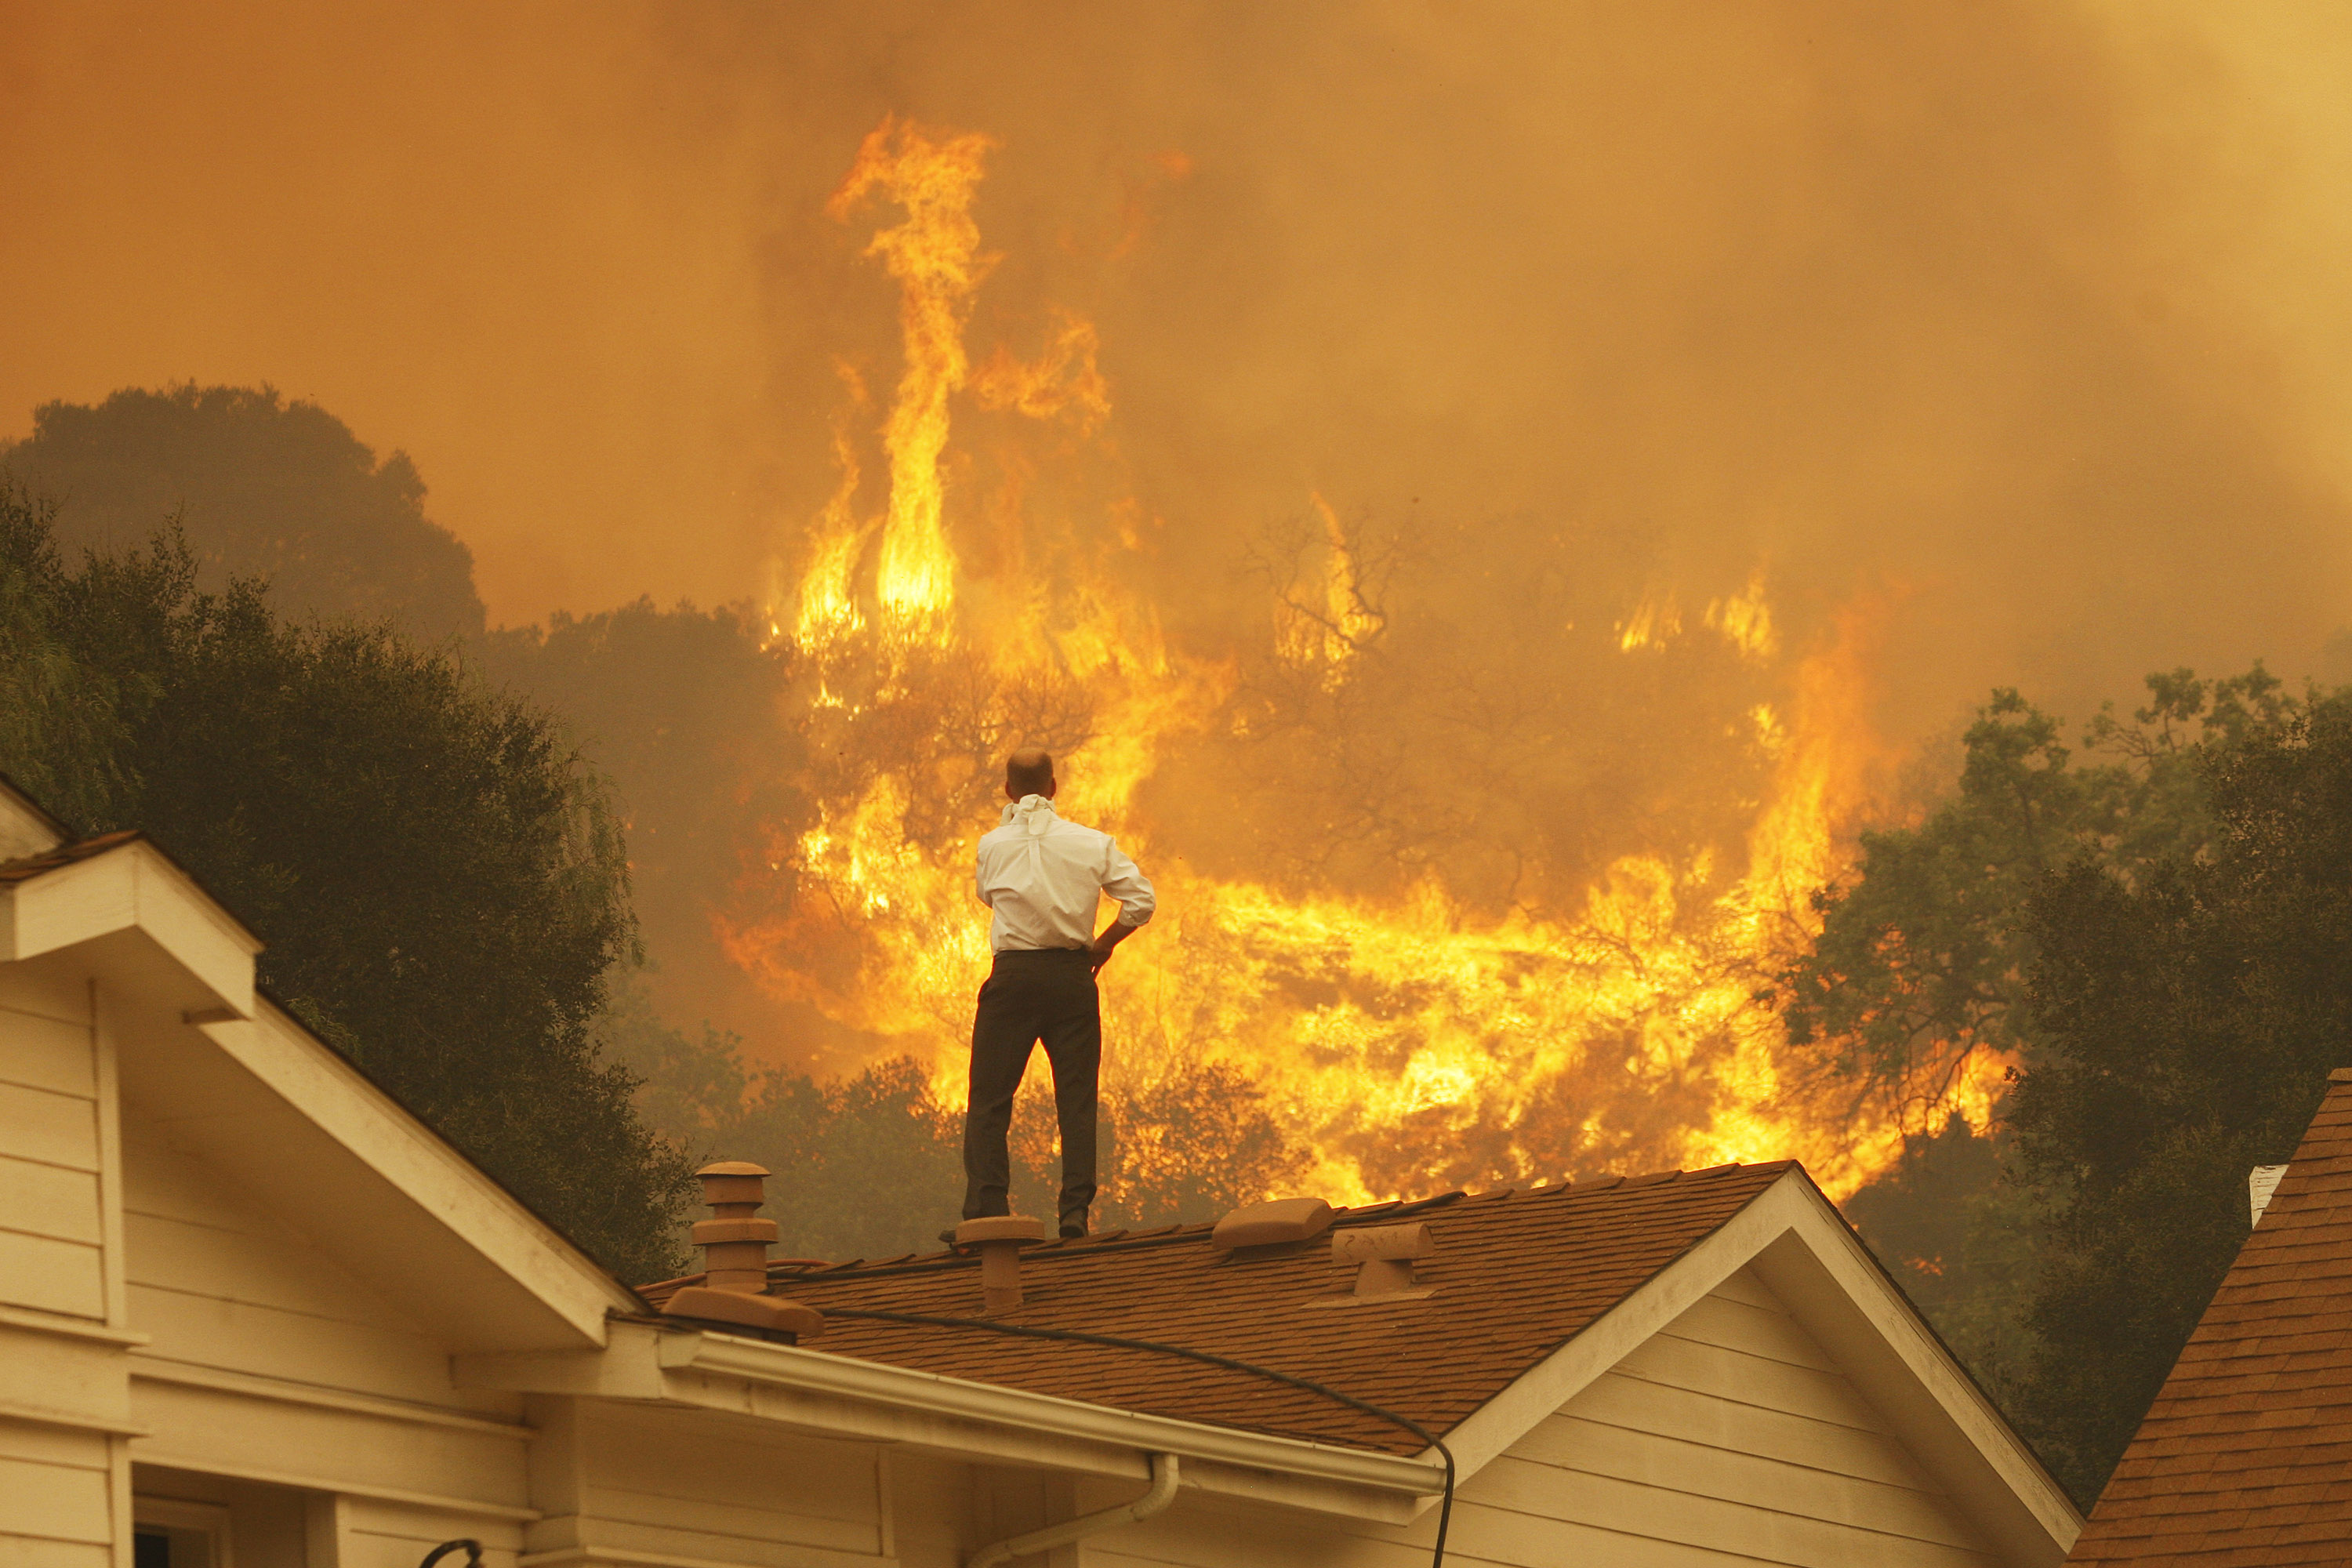 A man on a rooftop looks at approaching flames as wildfires grow near Camarillo, California, in May 2013. Photo: David McNew/Getty Images